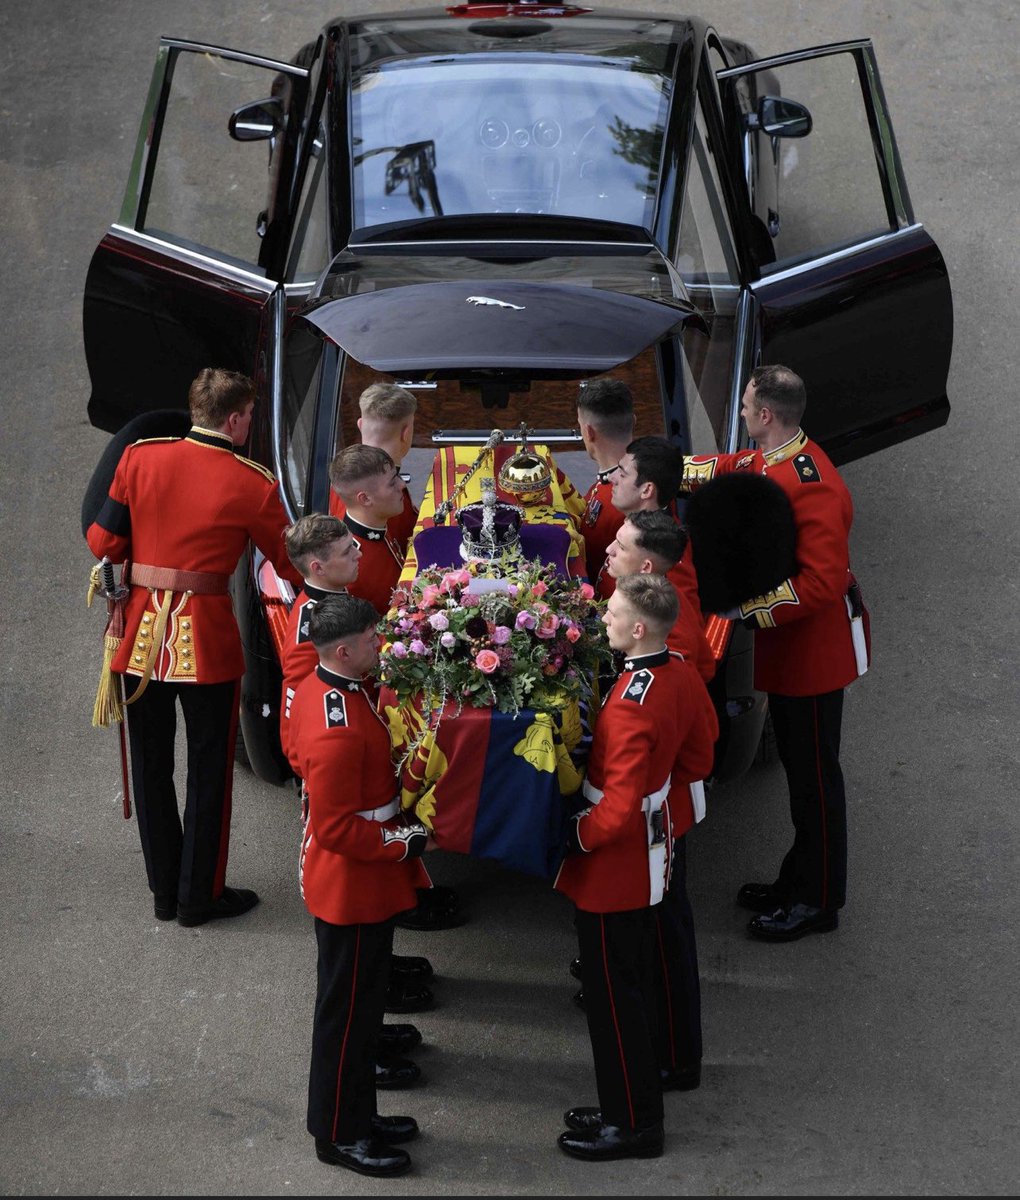 These lads have been impeccable throughout, an absolute credit to our forces and the crown. 

#queensfuneral #BearerParty #pallbearers #Queen #QueenElizabethII #forces #Crown